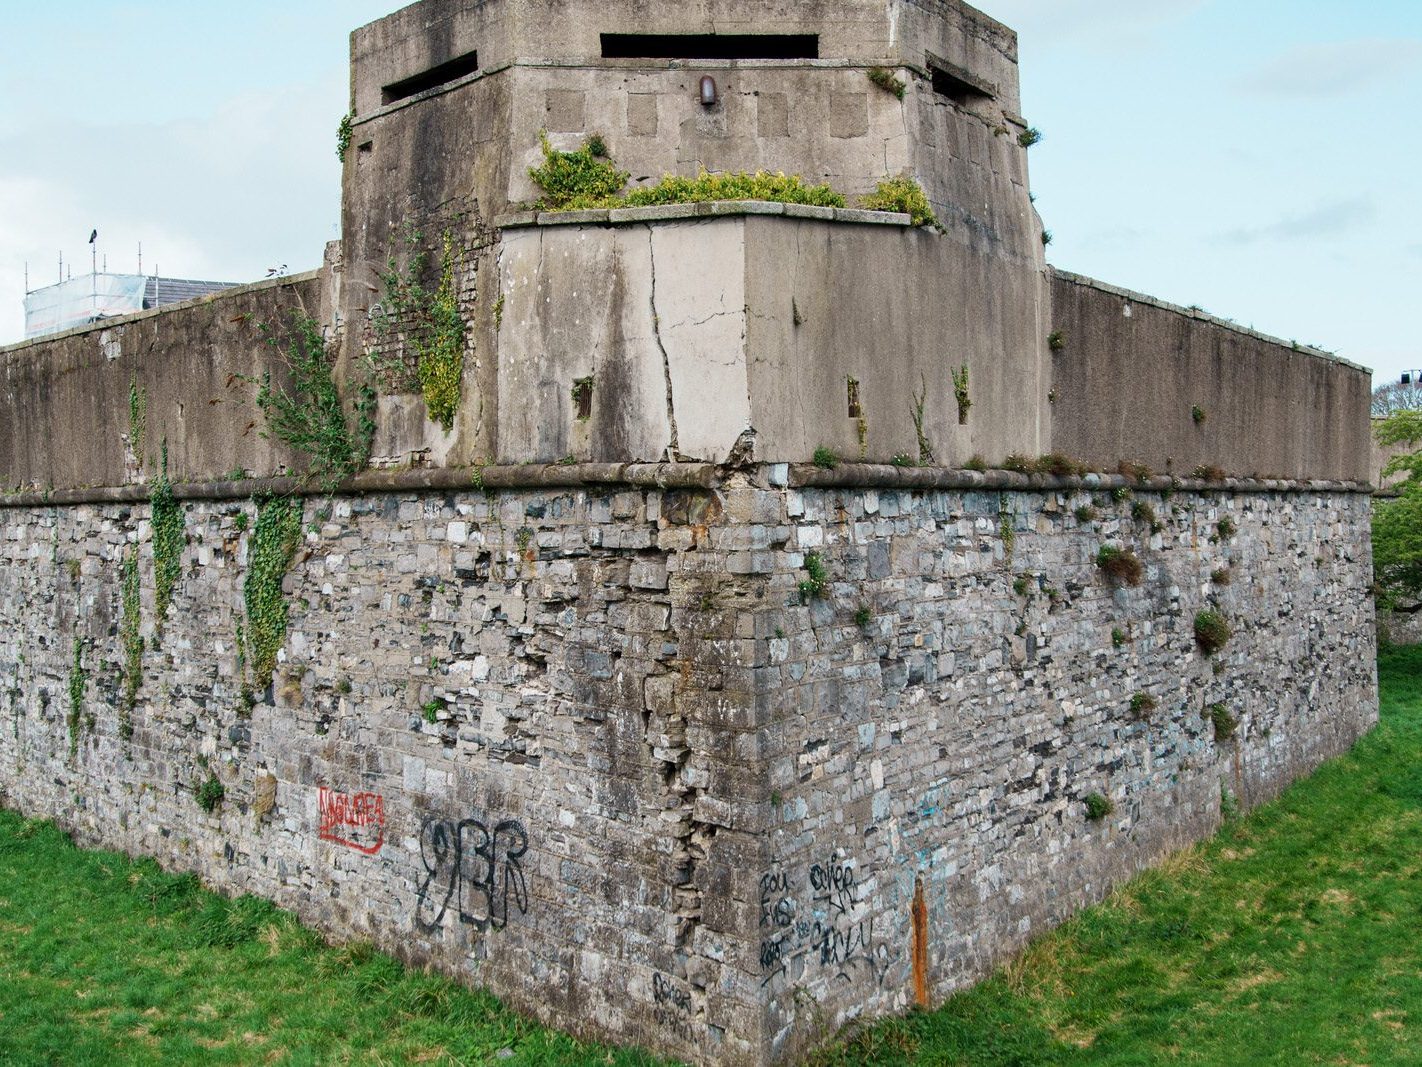 THE MAGAZINE FORT IN PHOENIX PARK [THERE IS MUCH INFORMATION AND A COMPLICATED STORY]-223495-1